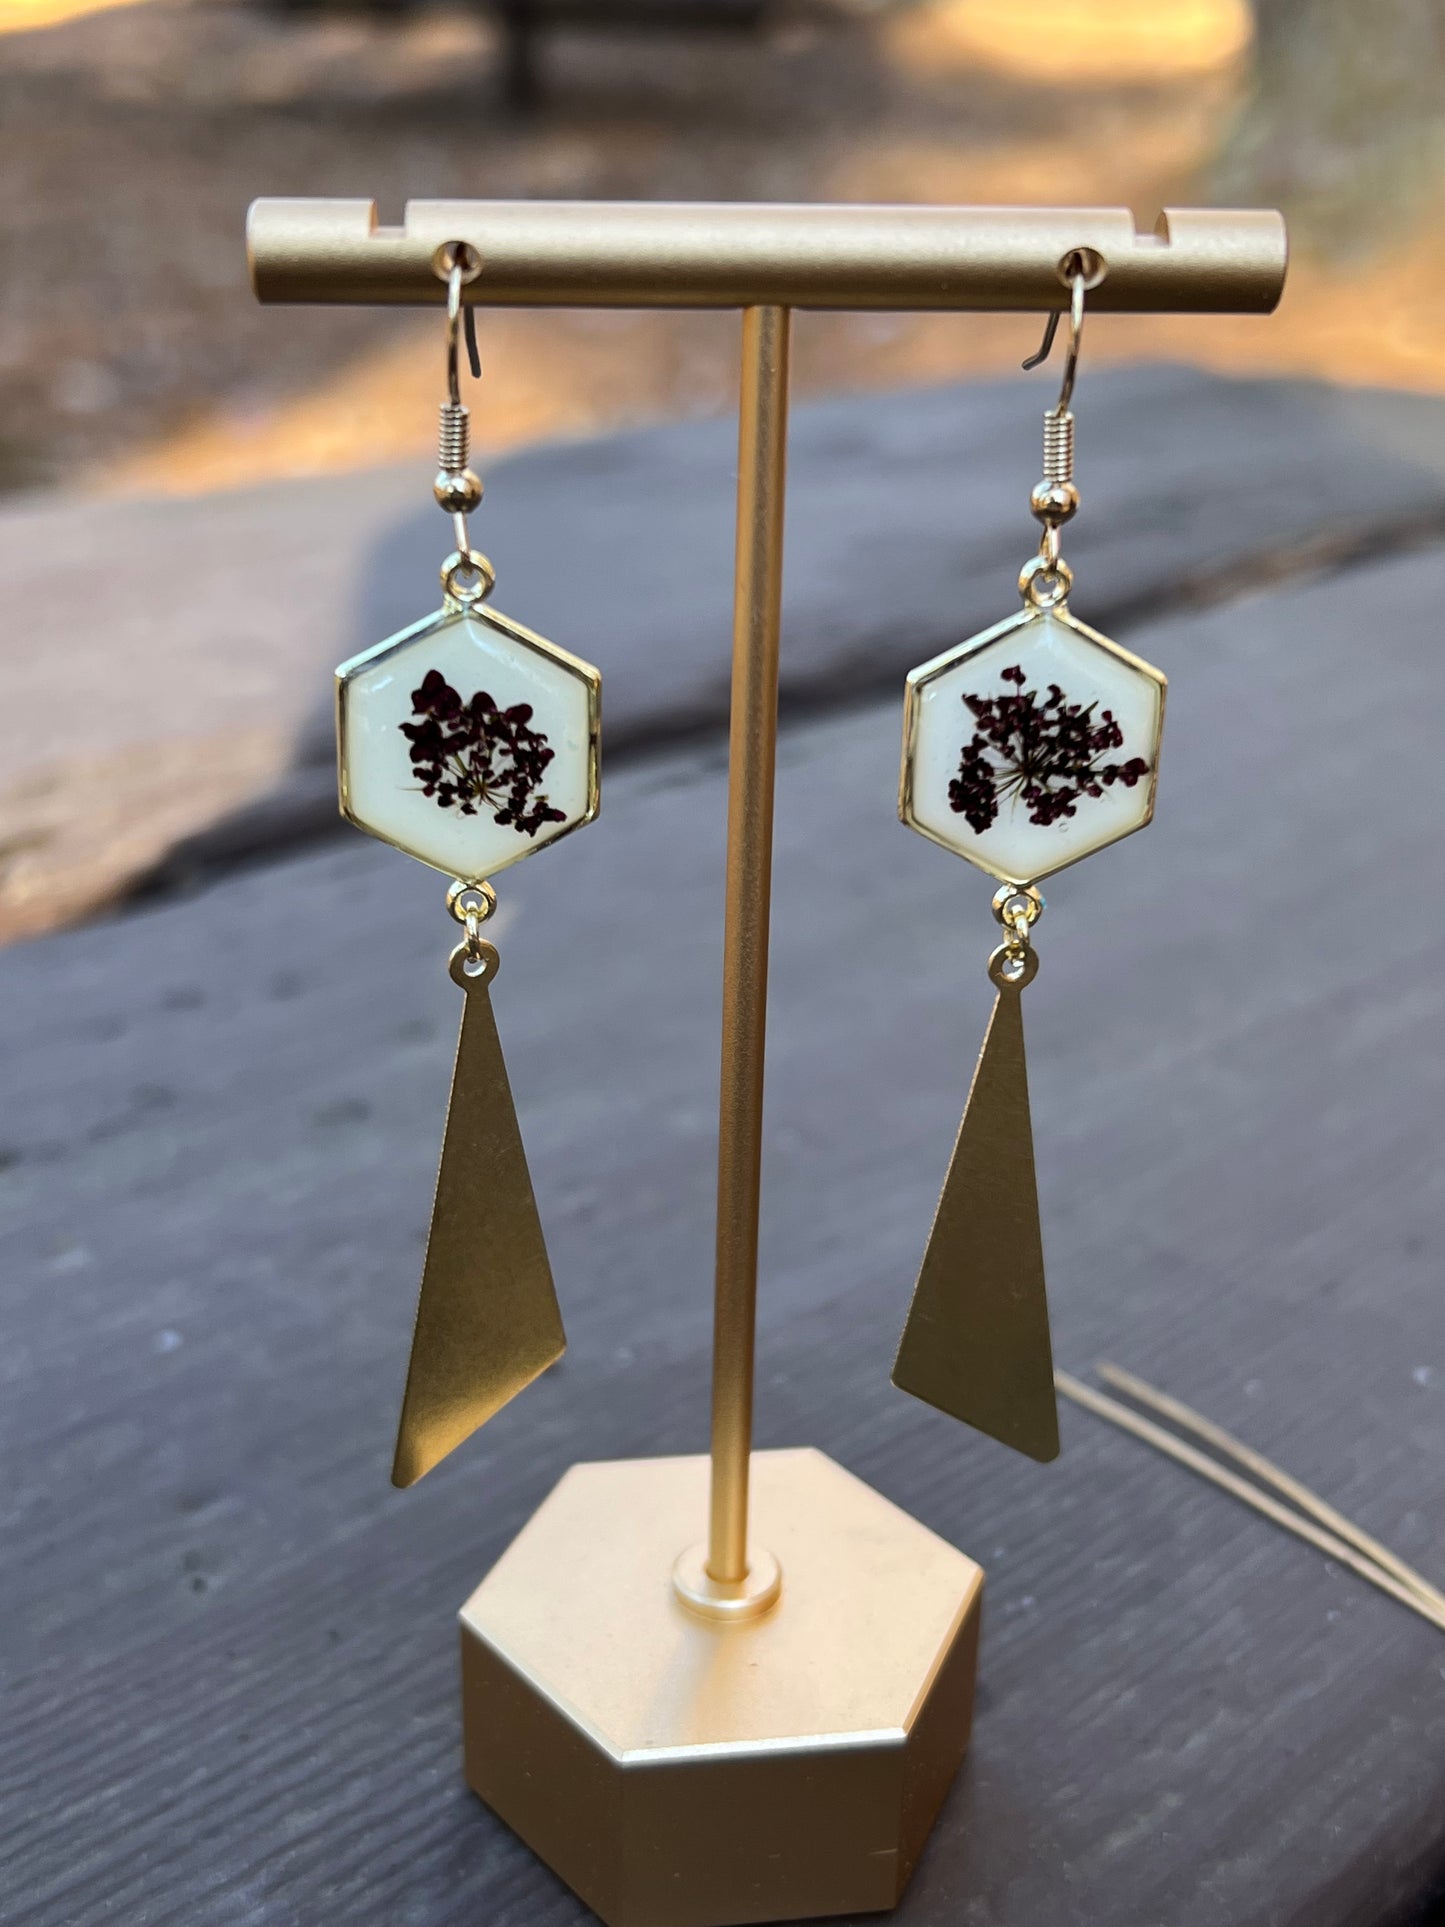 Honeycomb White Chocolate Queen Anne's Lace Earrings